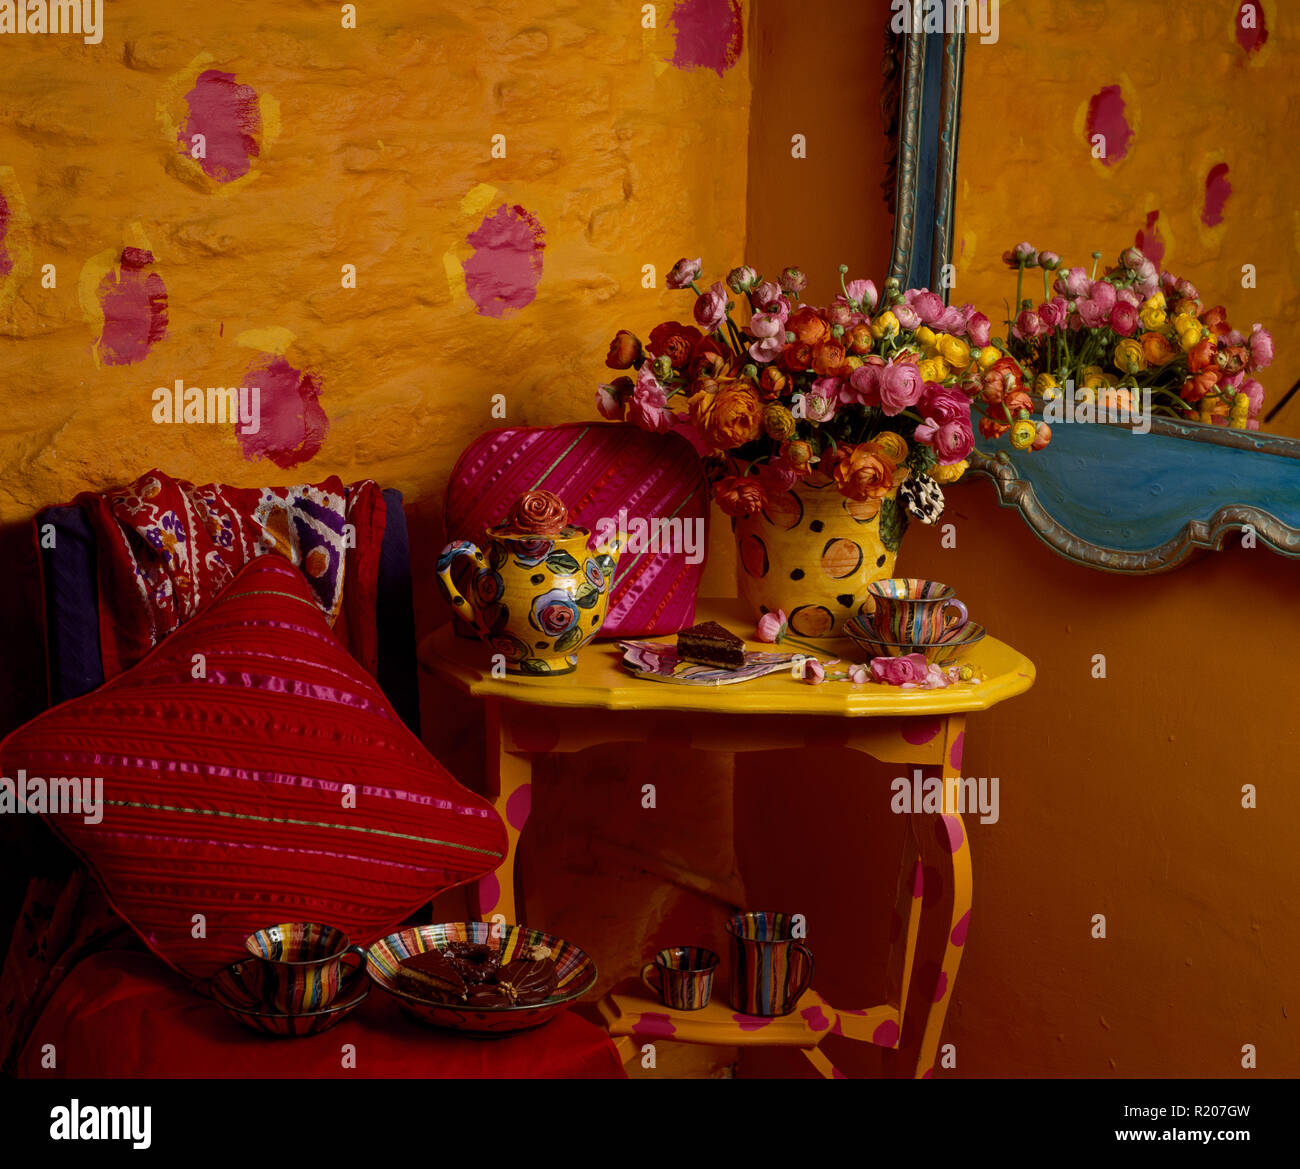 Colourful pottery on a yellow painted side table Stock Photo